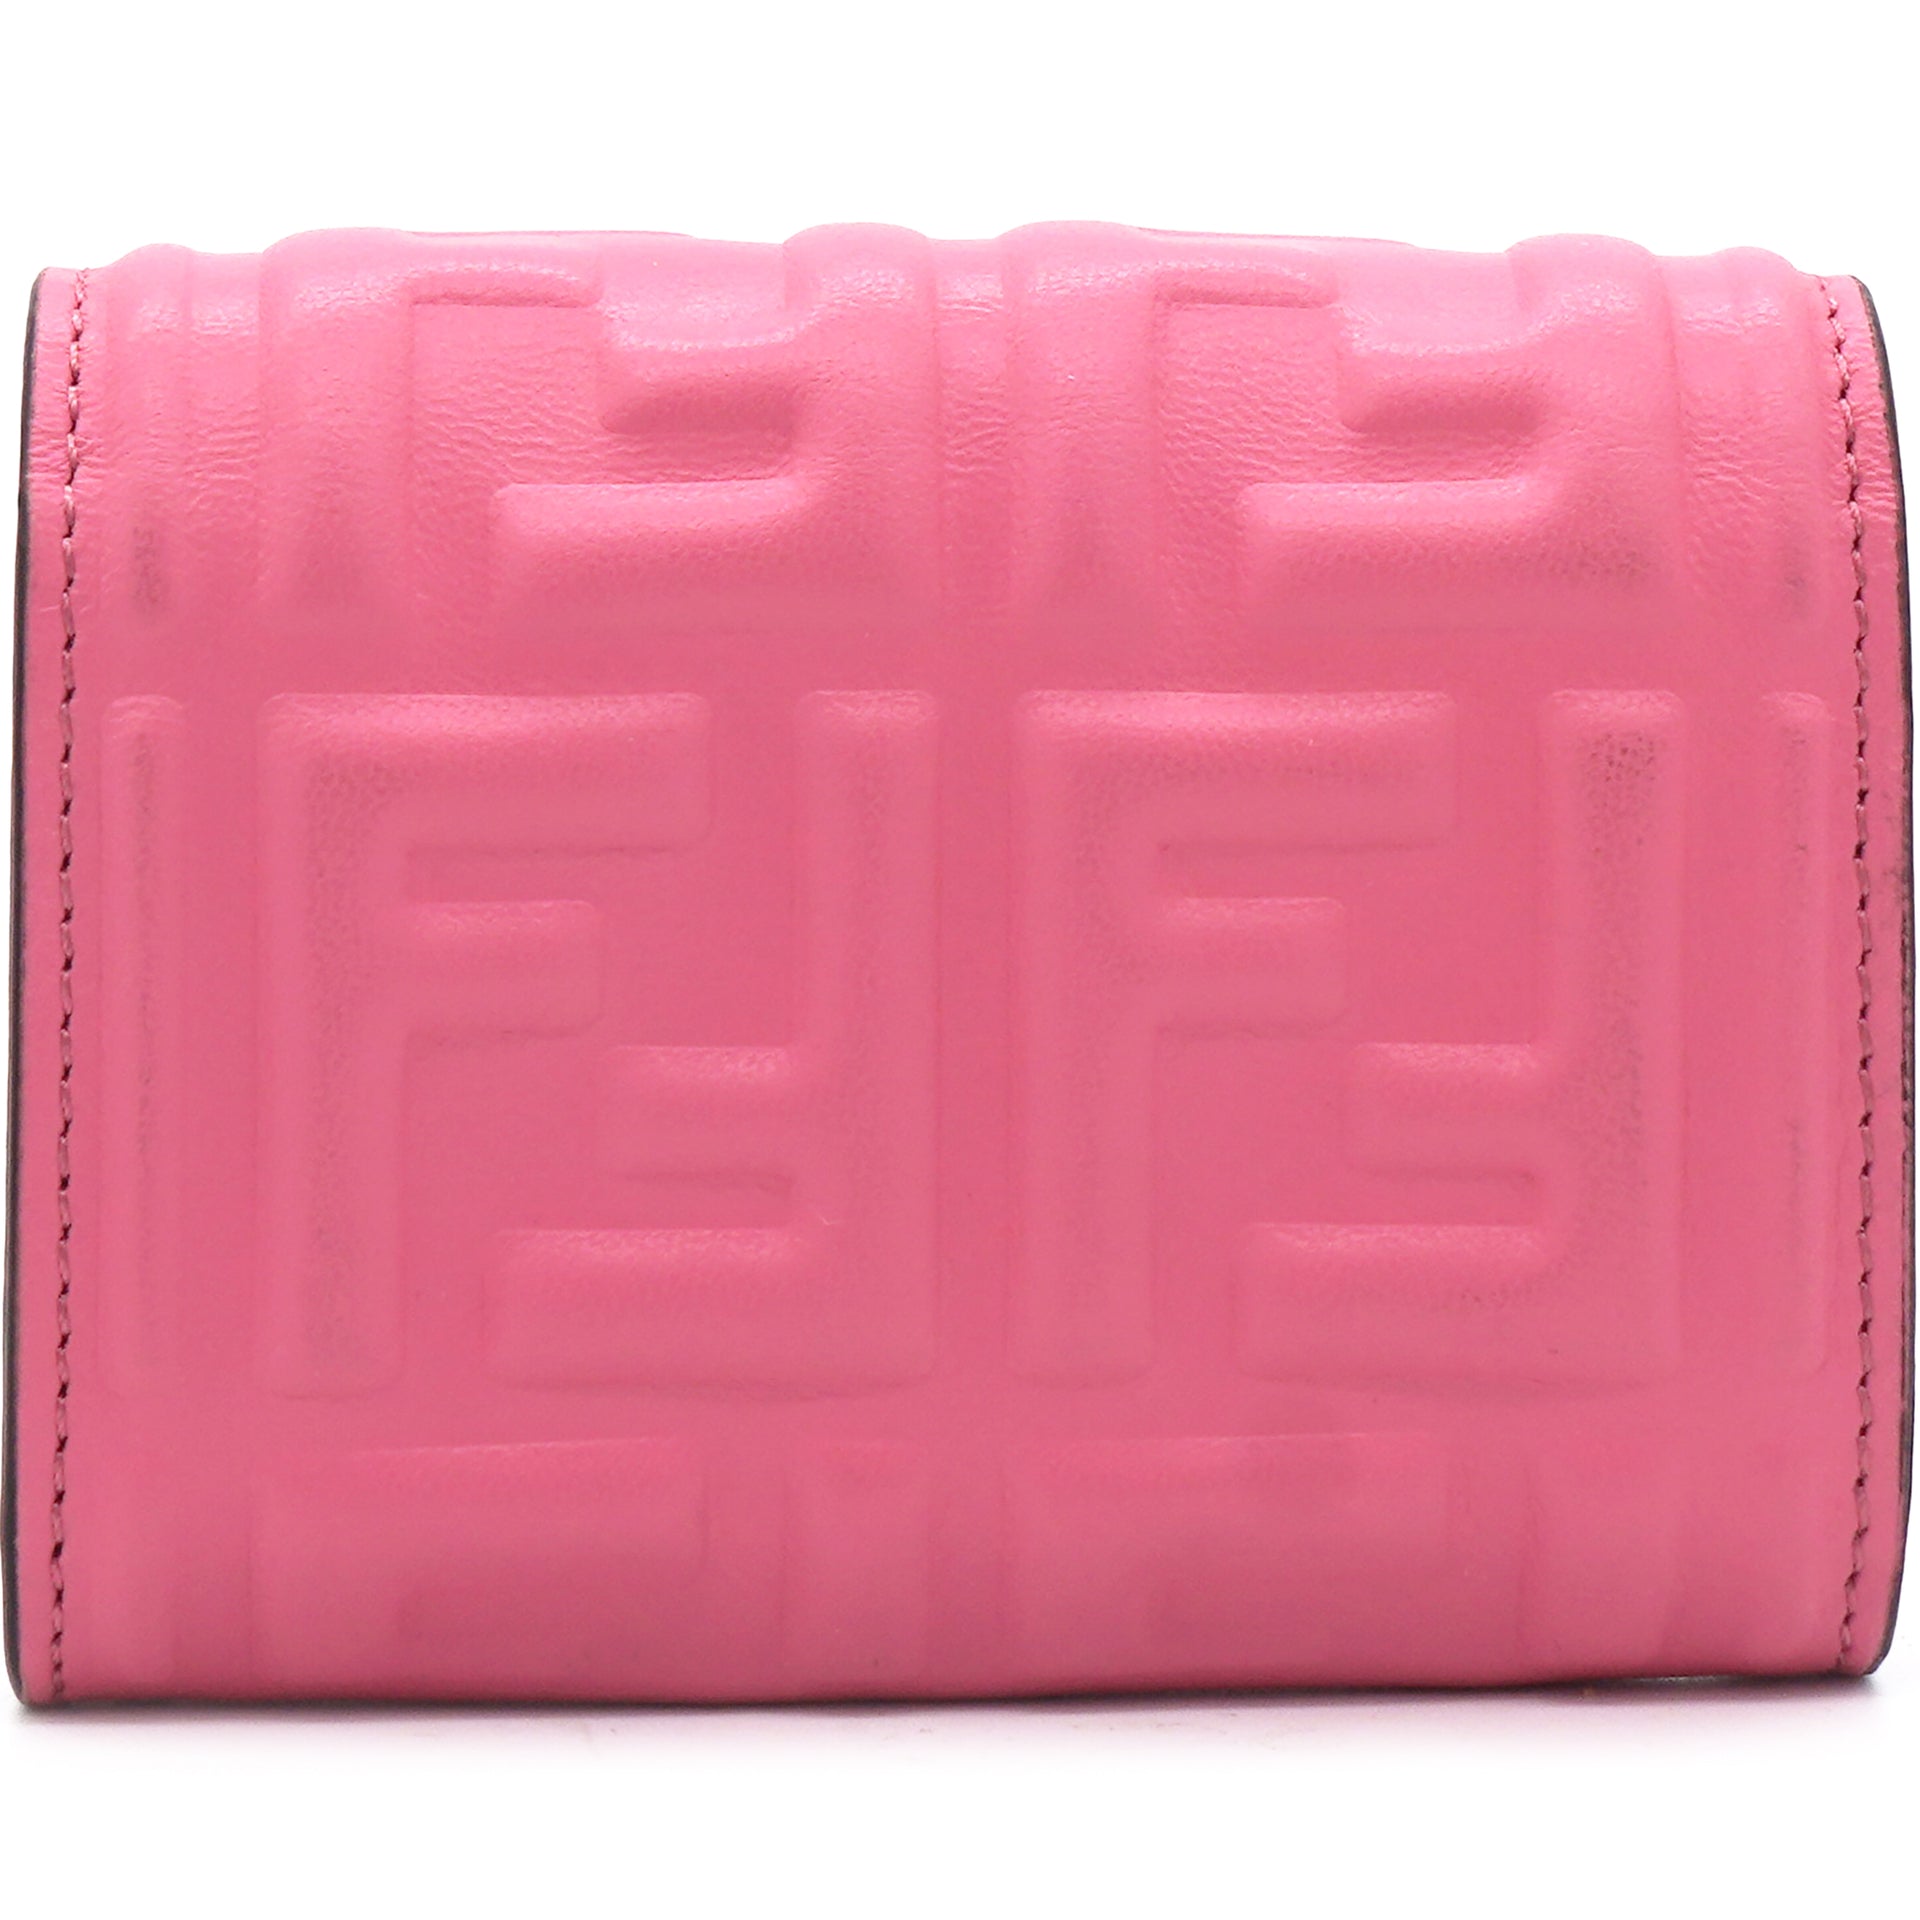 New Fendi Candy Pink Baguette Micro FF Monogram Leather Trifold Wallet